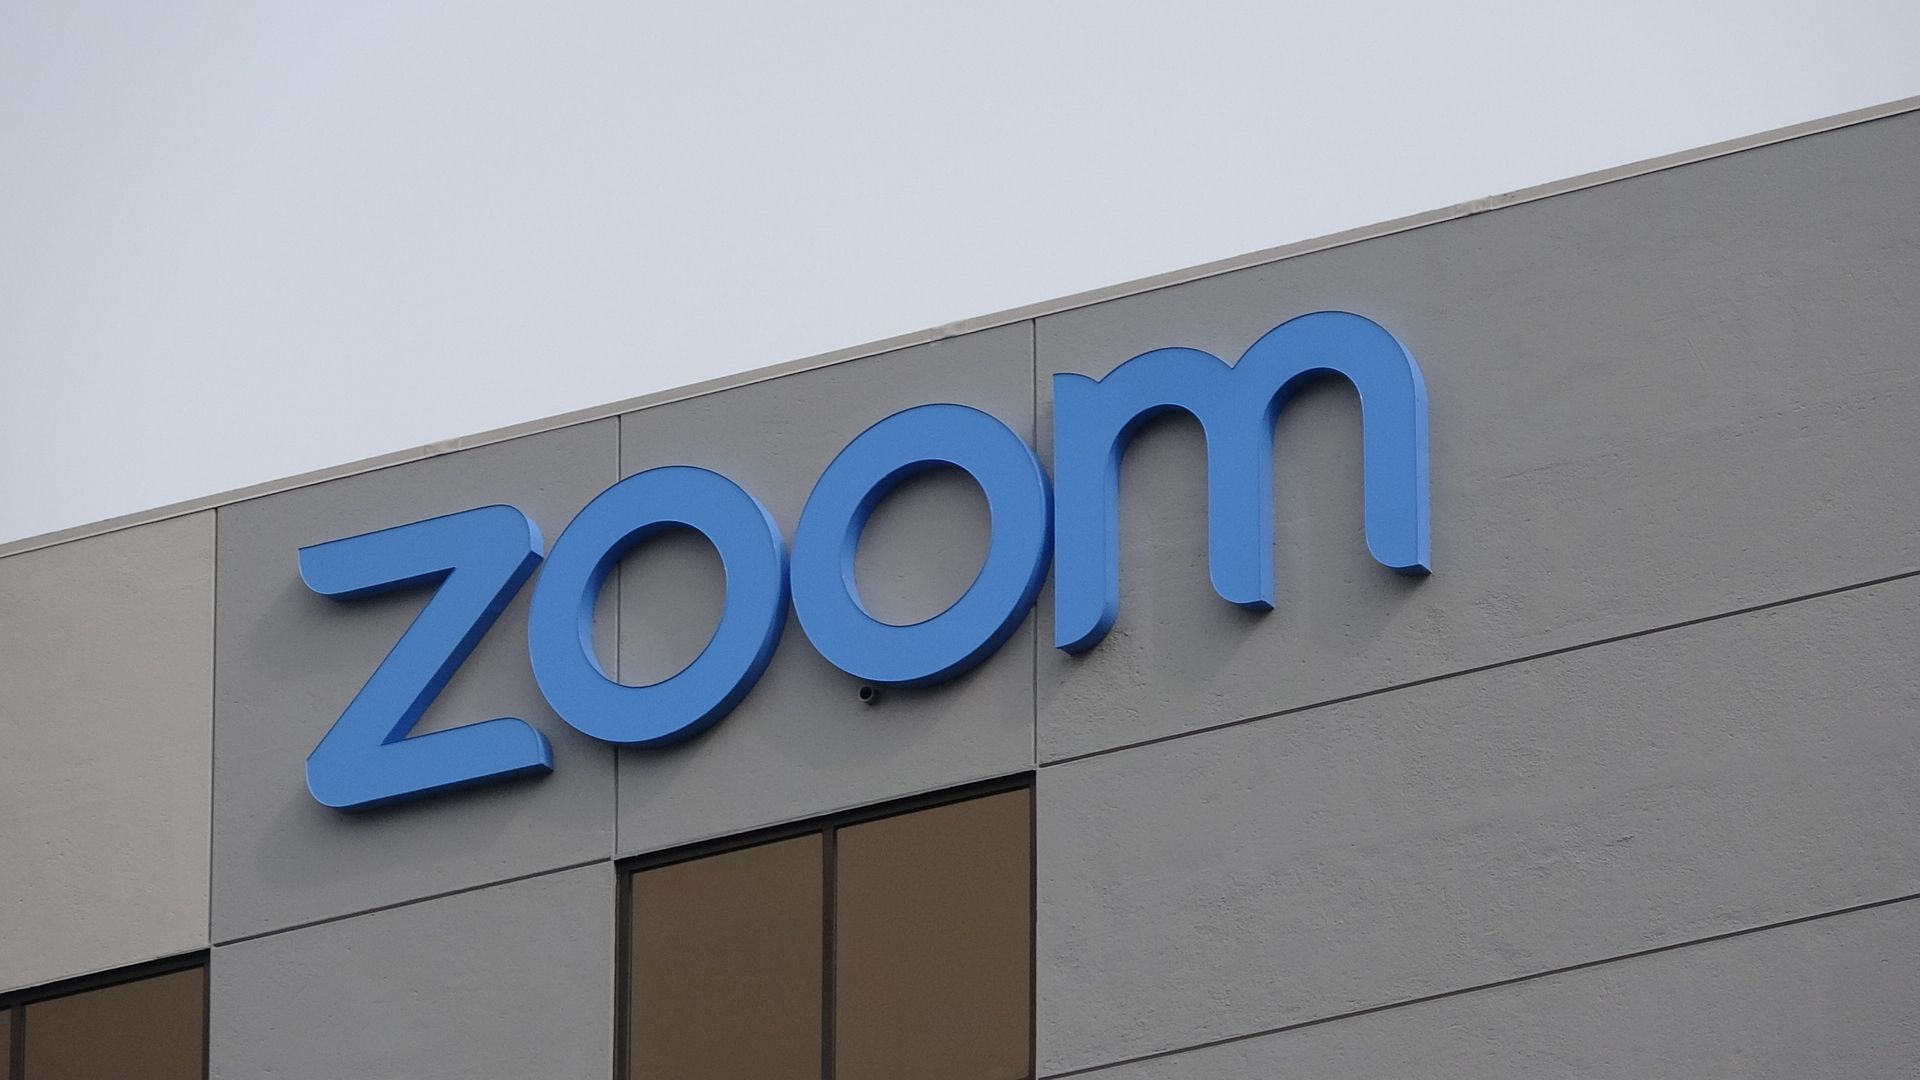 Photo of a building with a sign reading "Zoom"